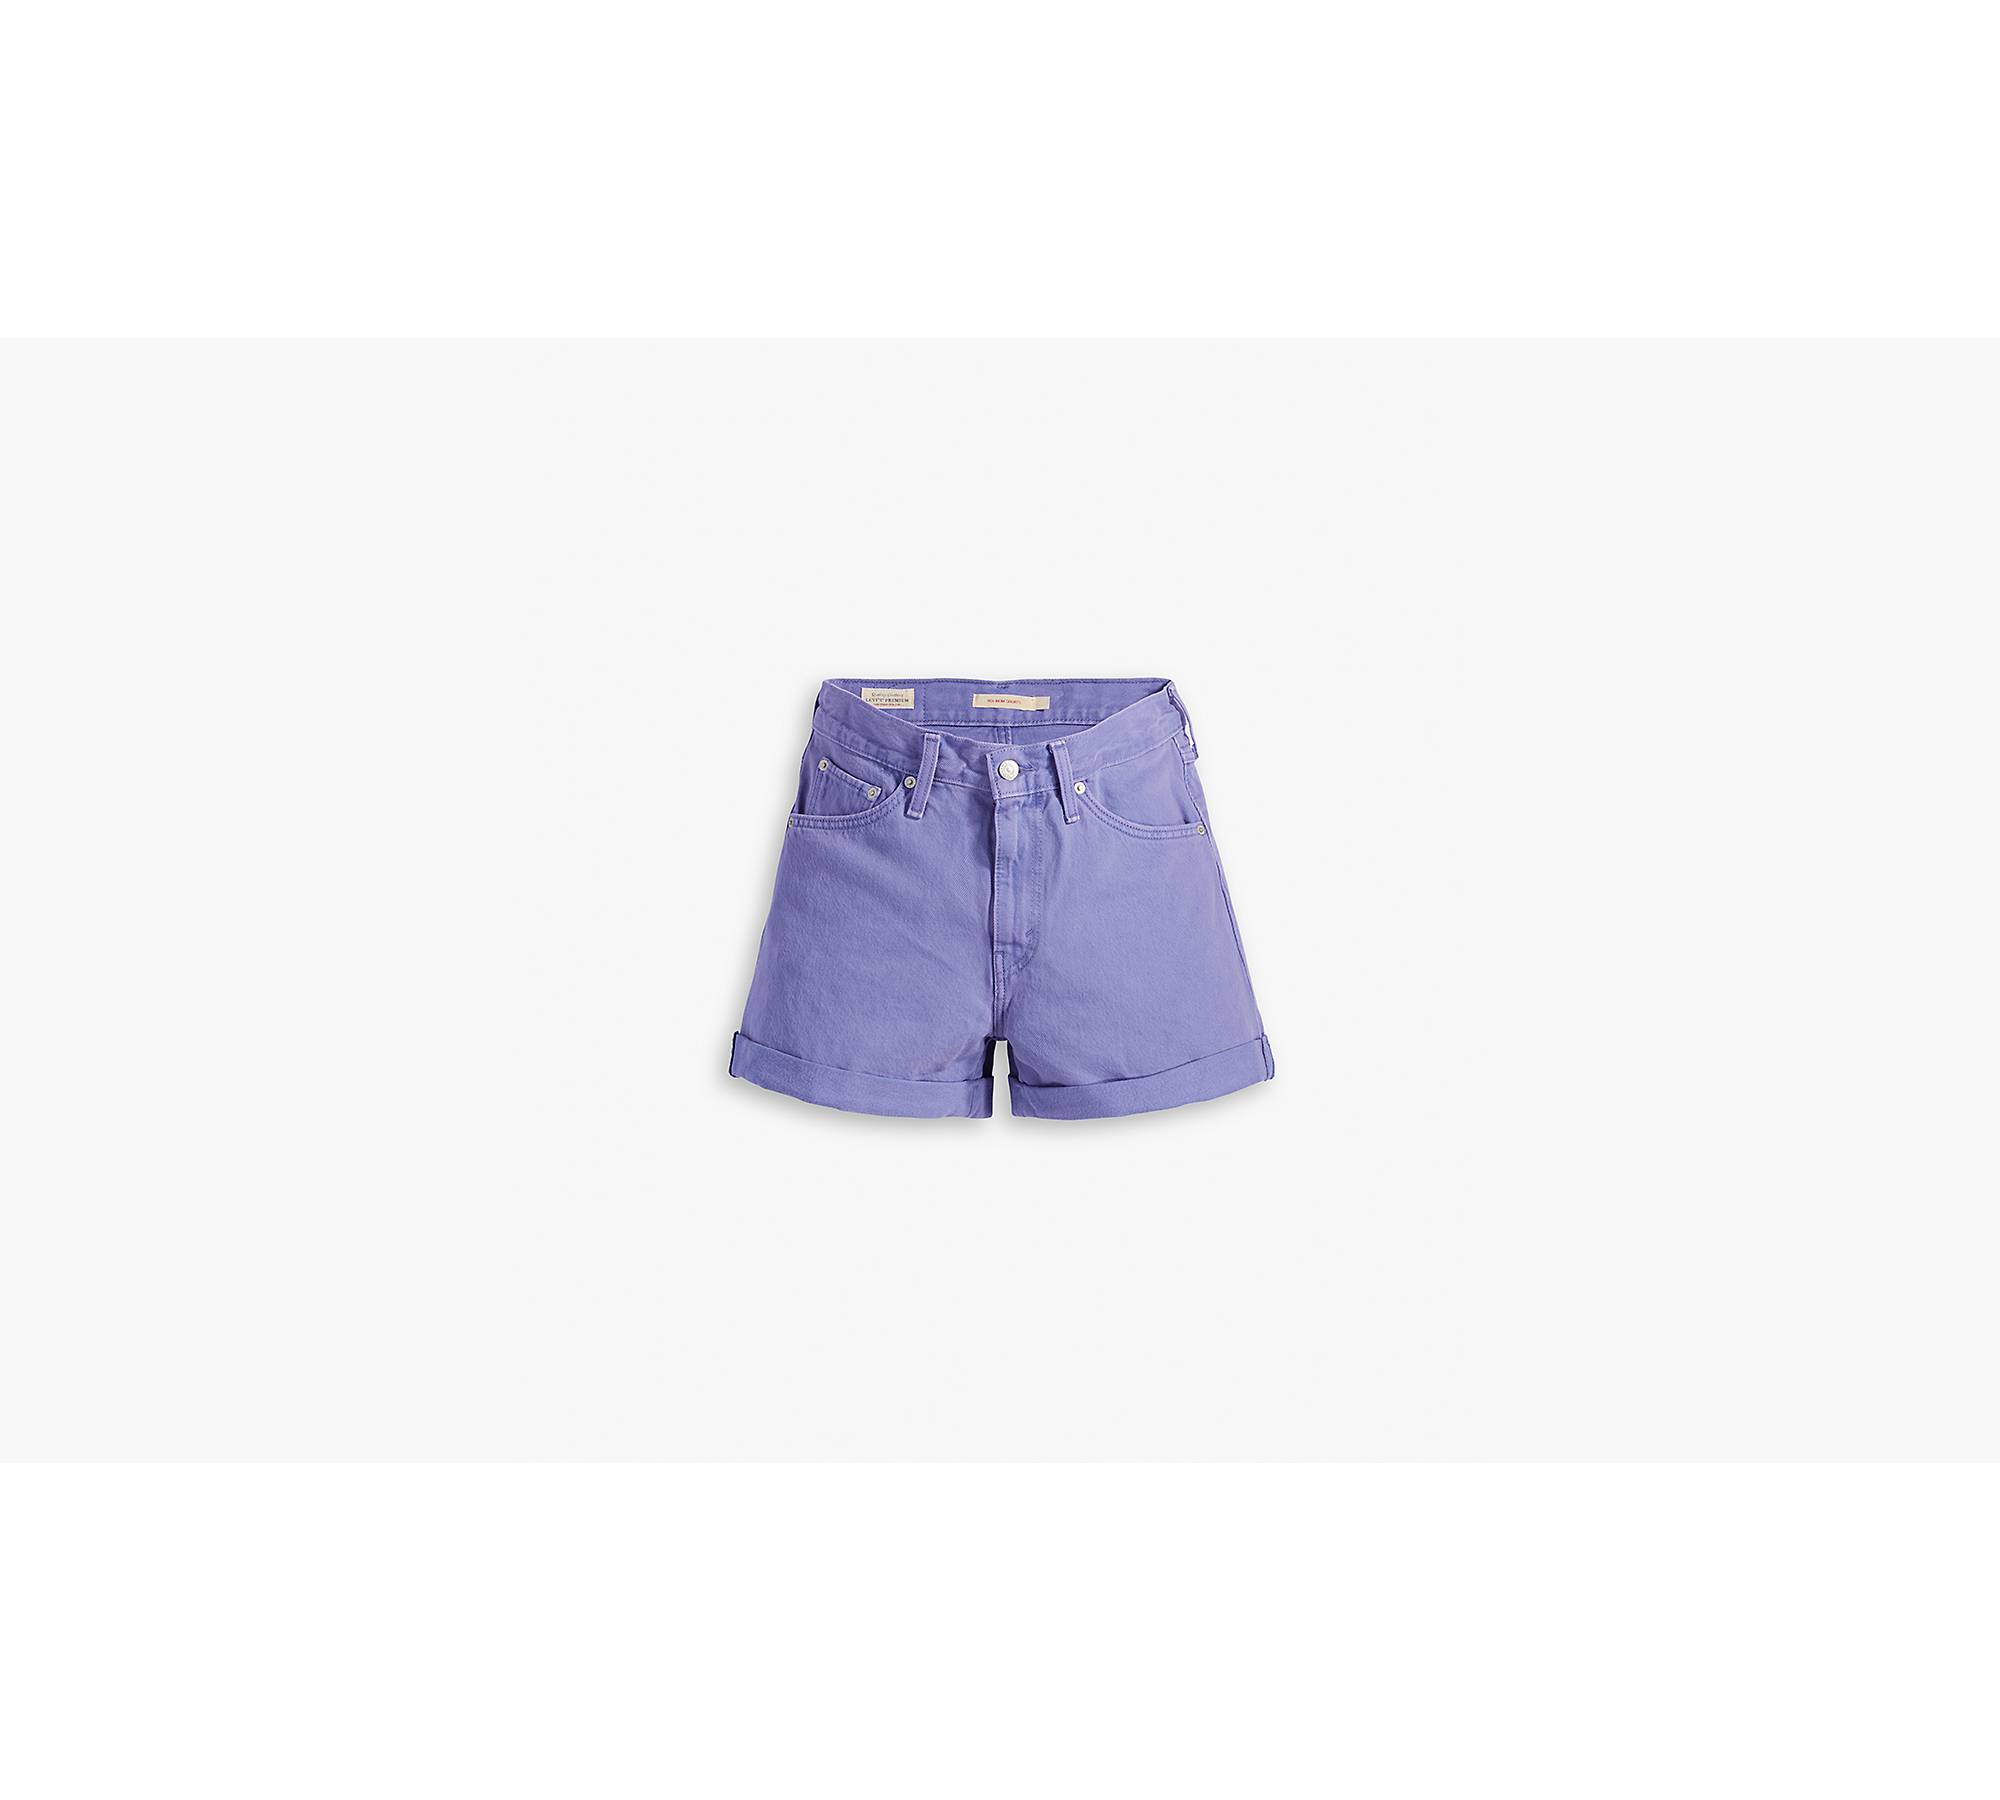 Levi's Rolled '80s Mom Women's Shorts - Dusty Persian Violet 24